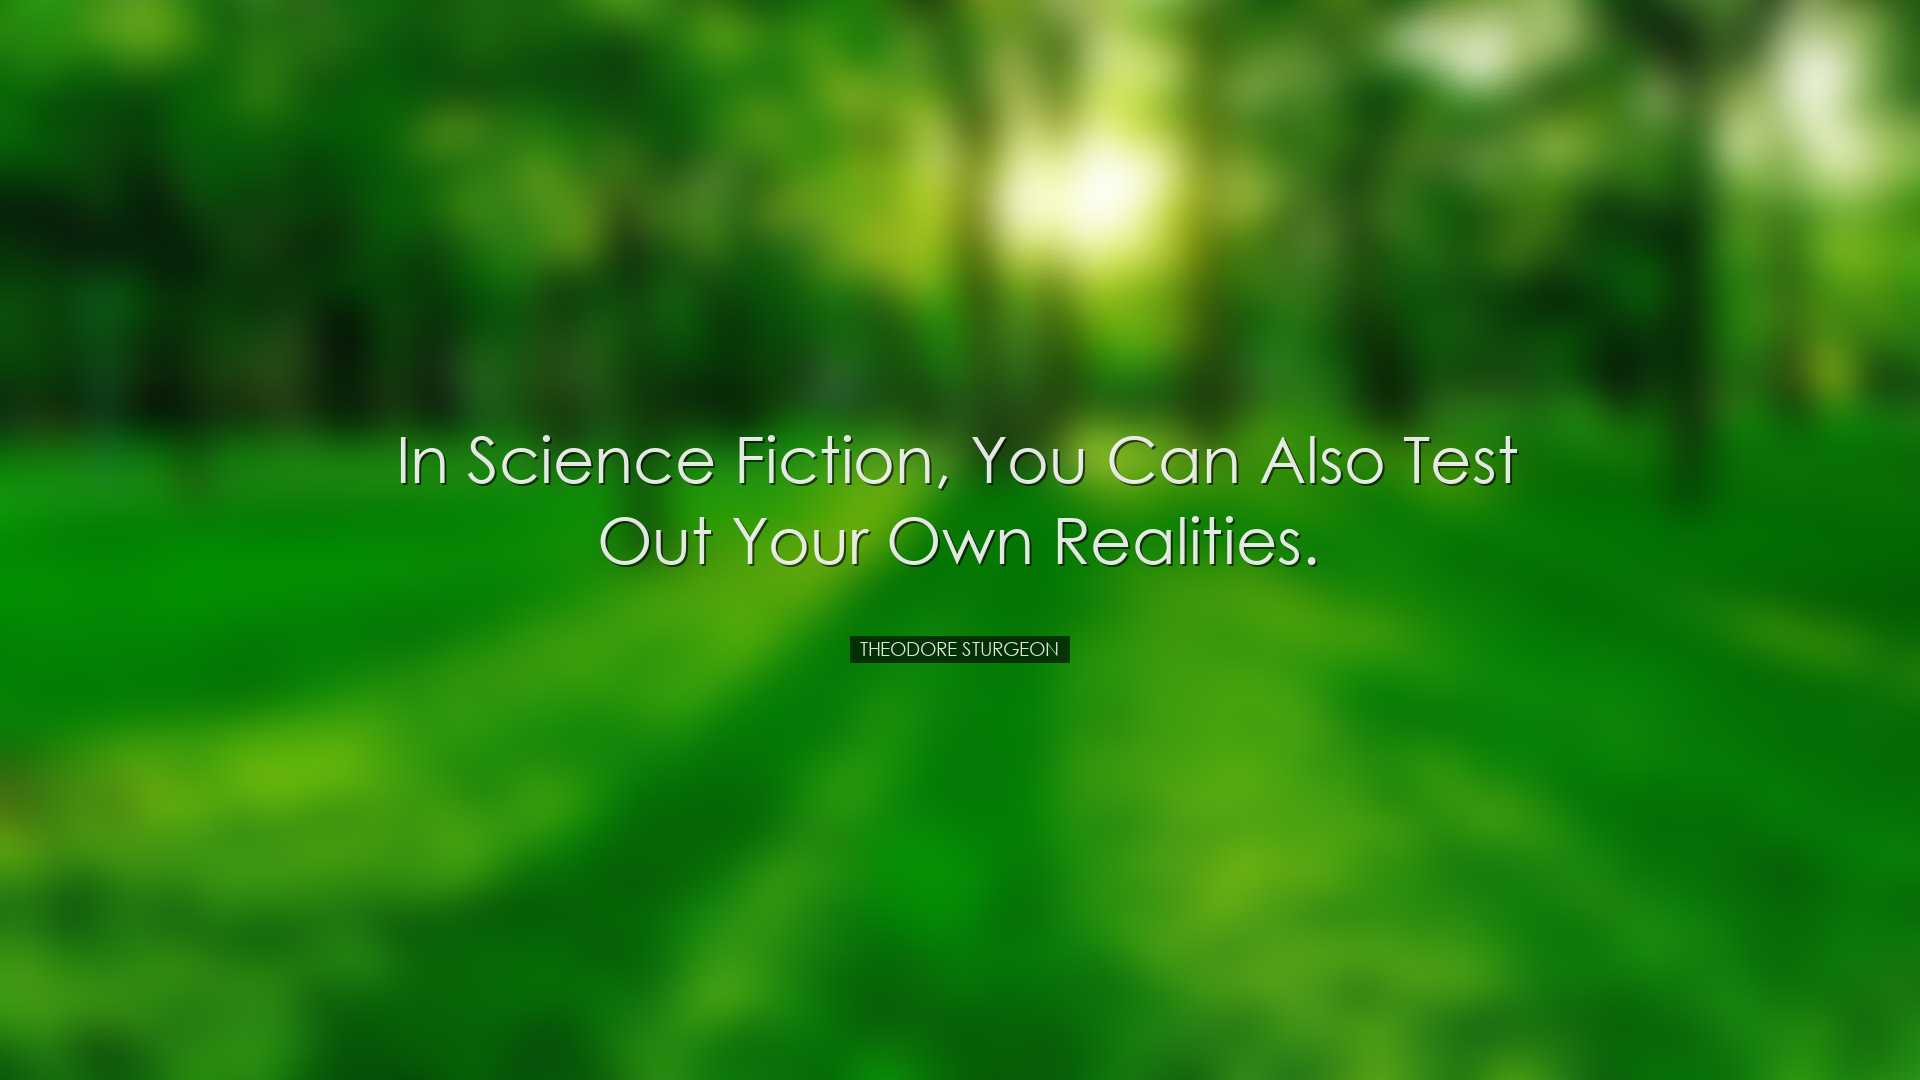 In science fiction, you can also test out your own realities. - Th